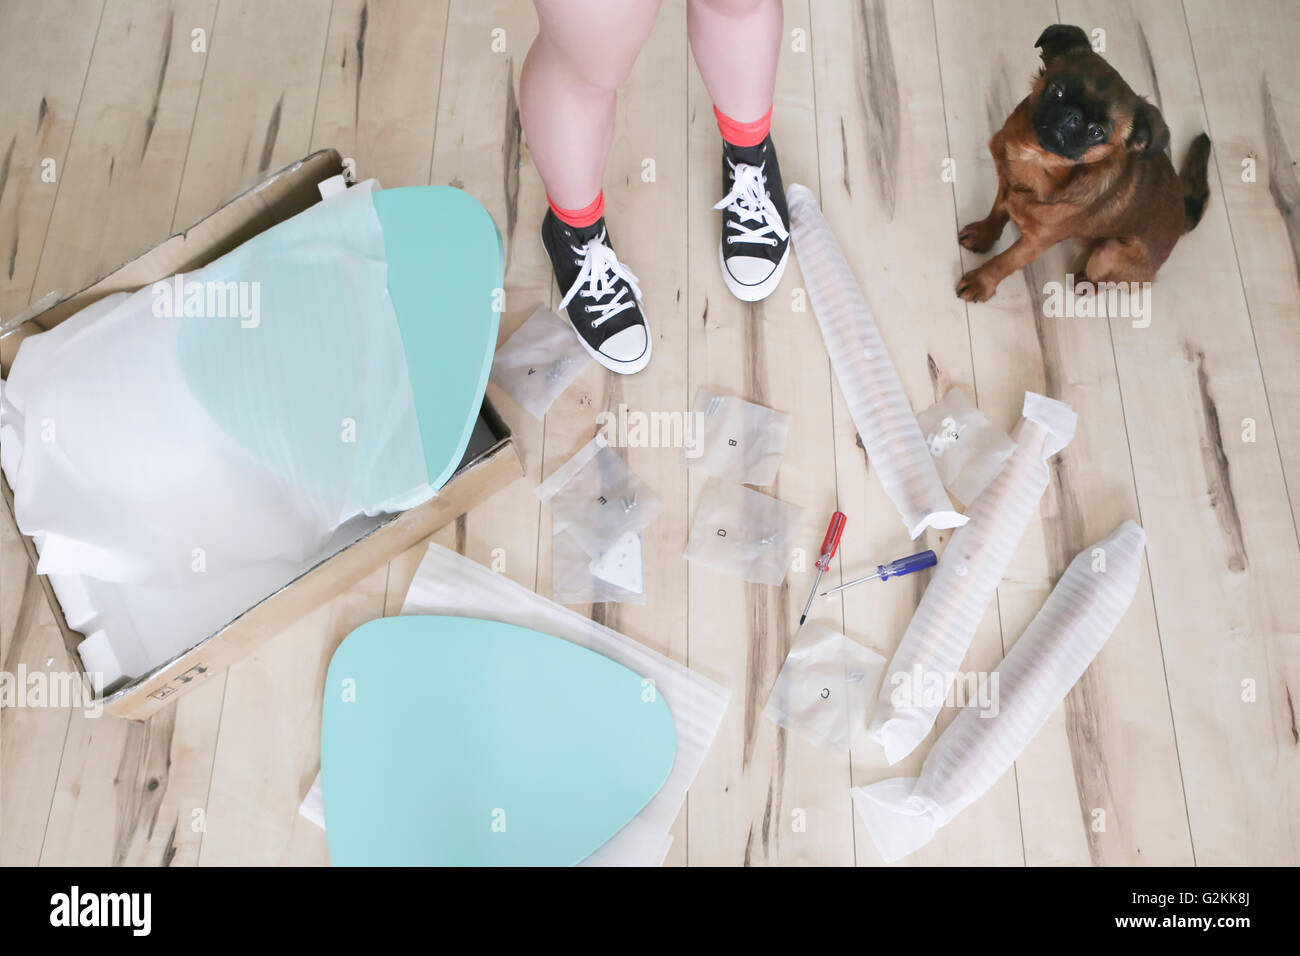 Woman's legs surrounded by unassembled table pieces with her dog Stock Photo